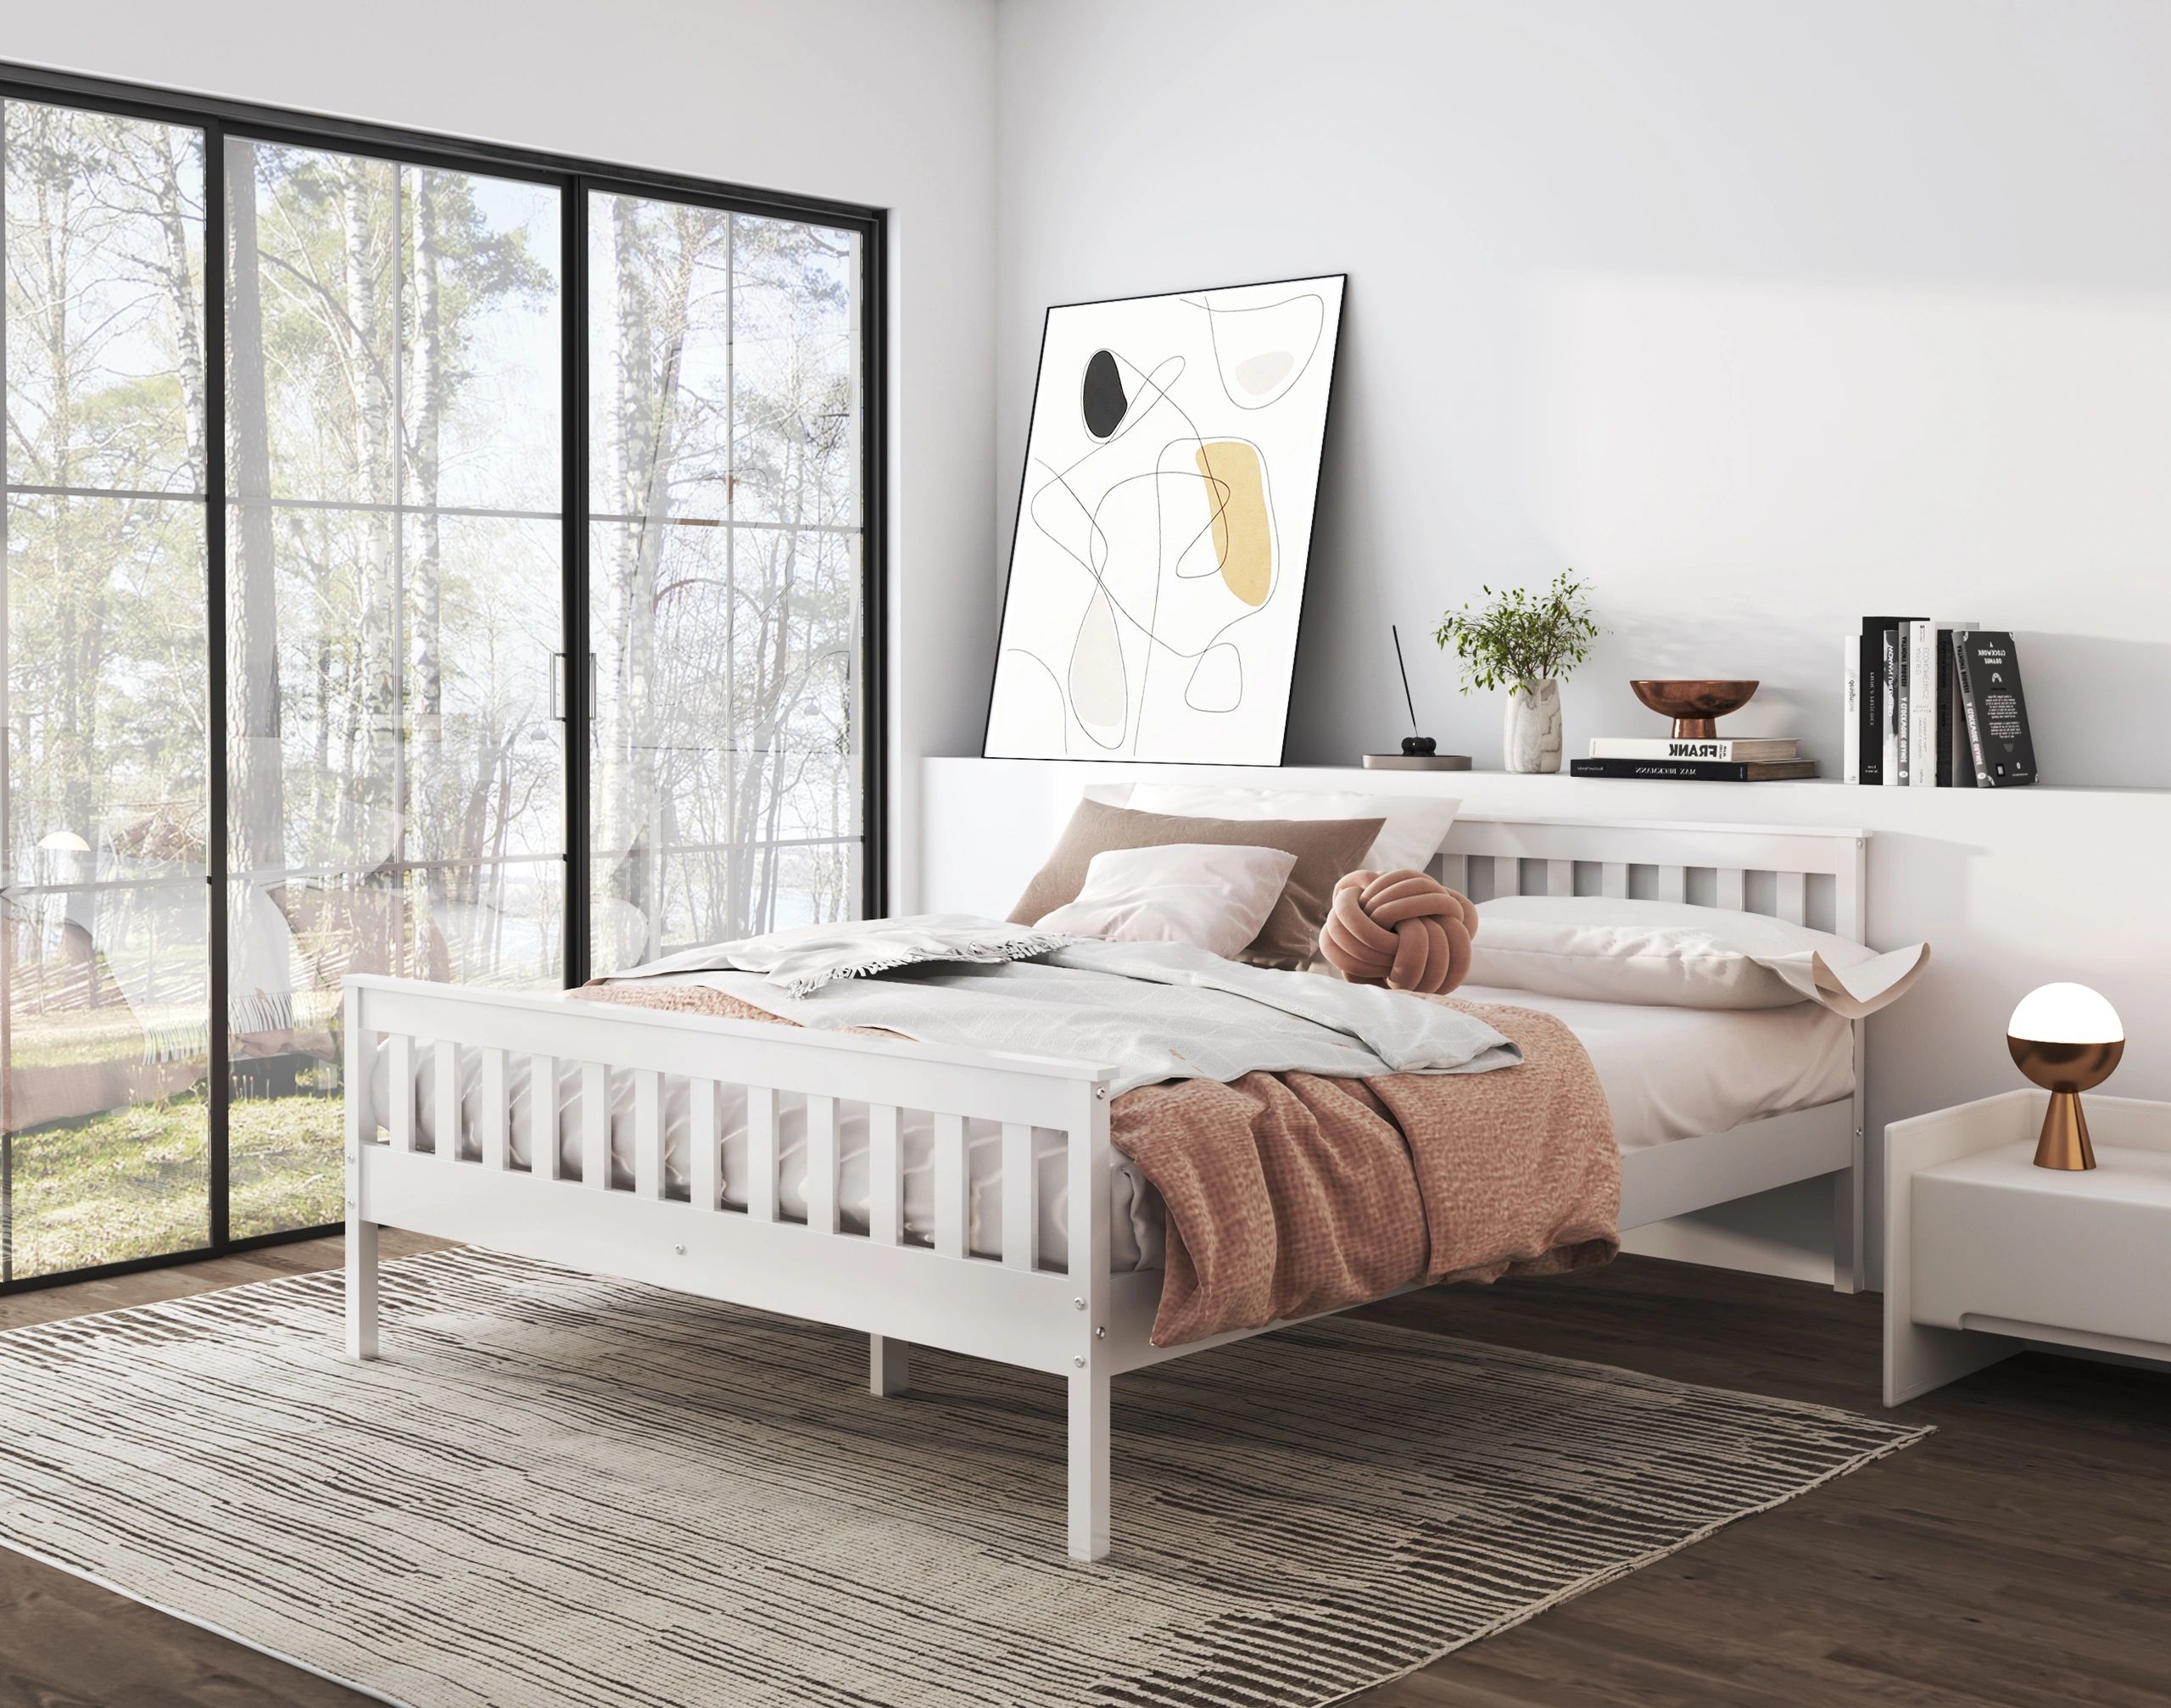 Pine Solid Wood Shaker Bed With Slats

